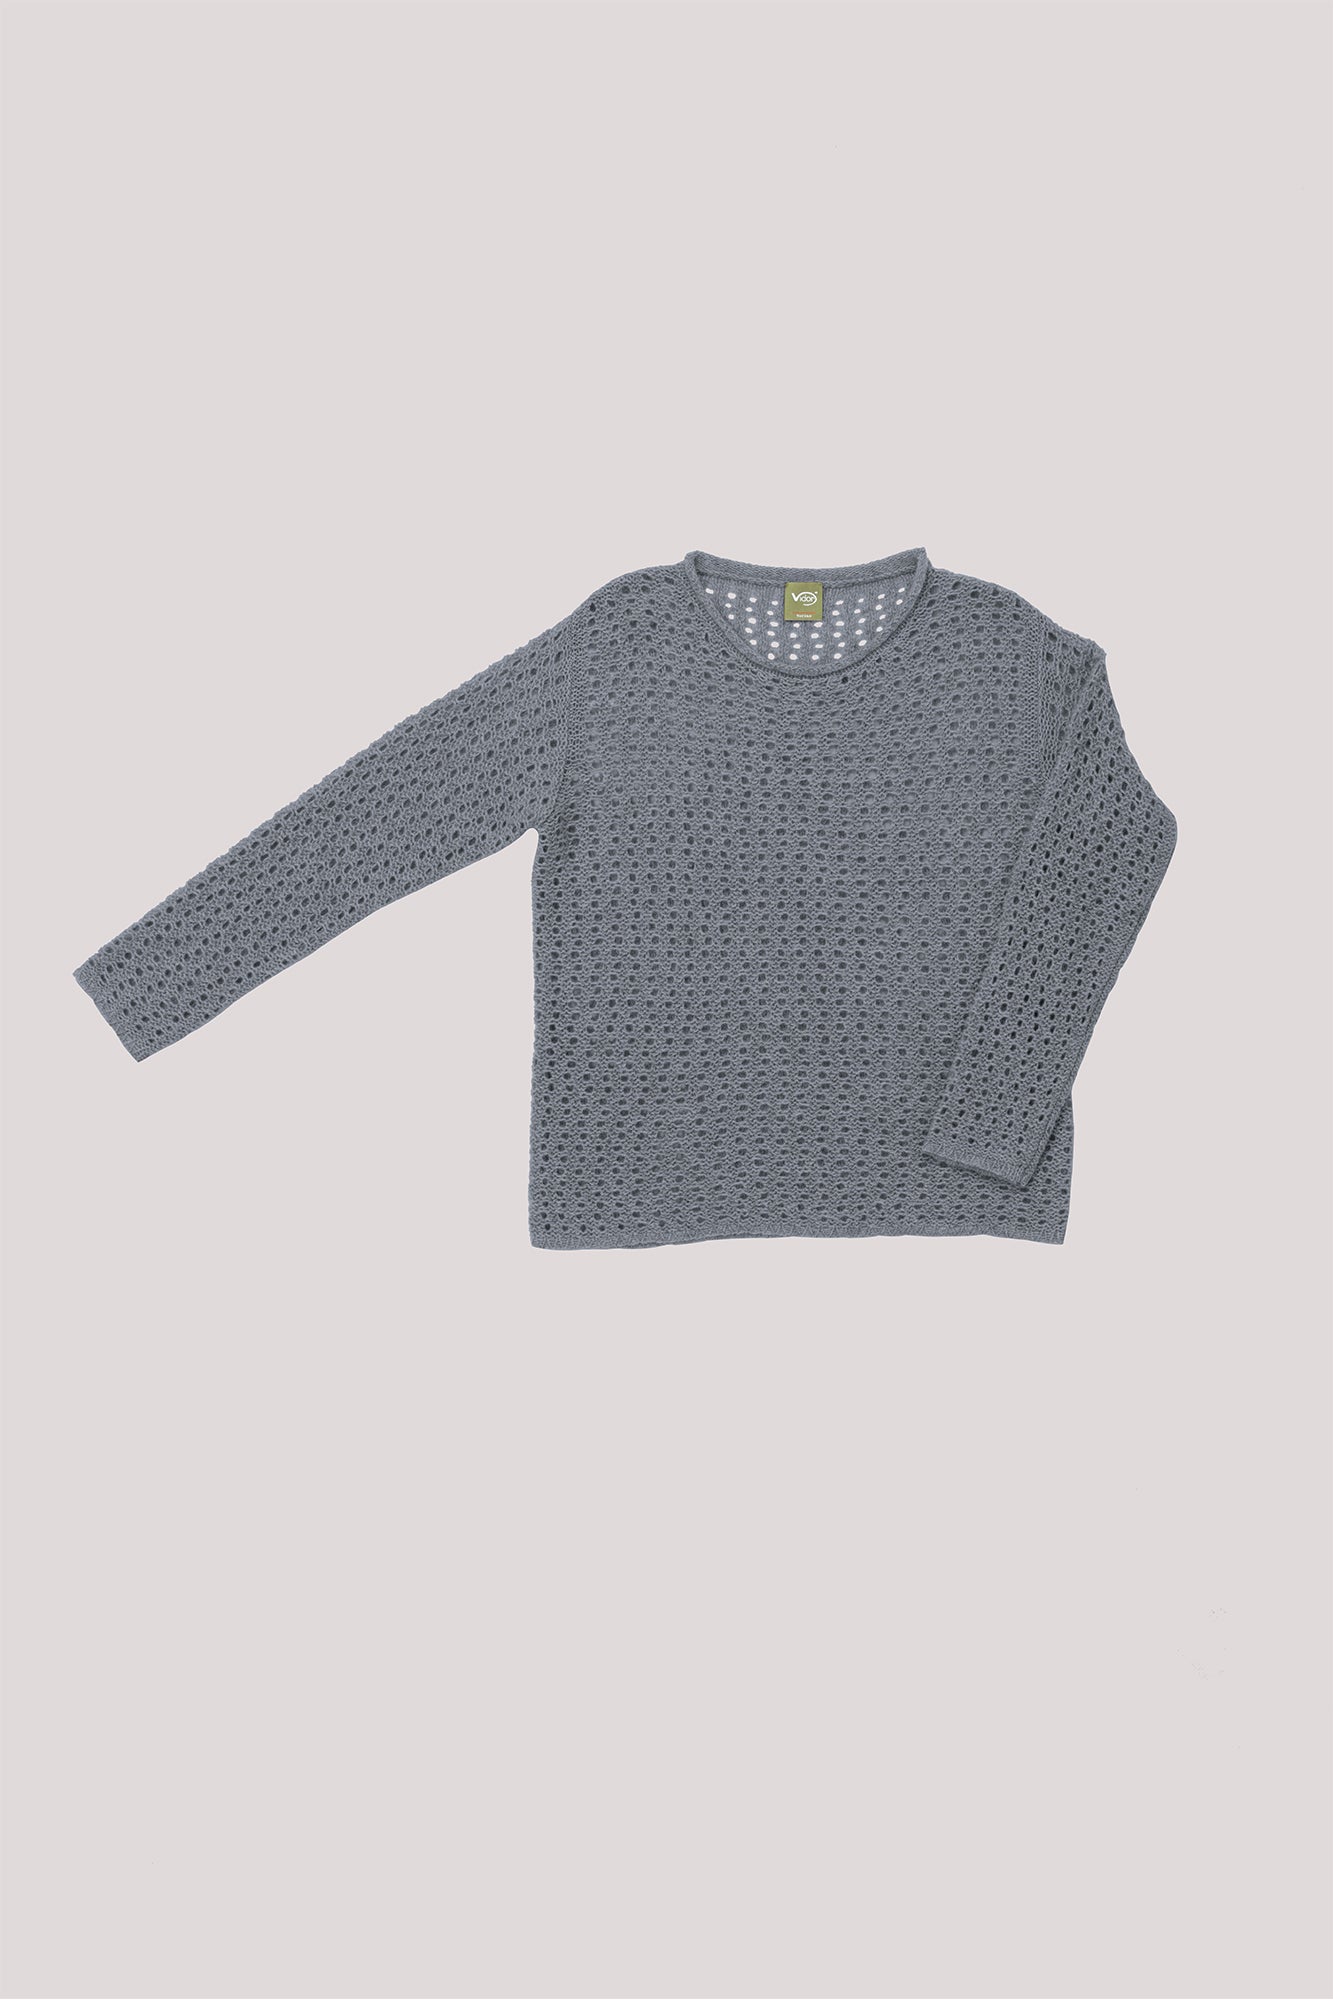 PERFORATED "BOAT NECK" 100% CASHMERE